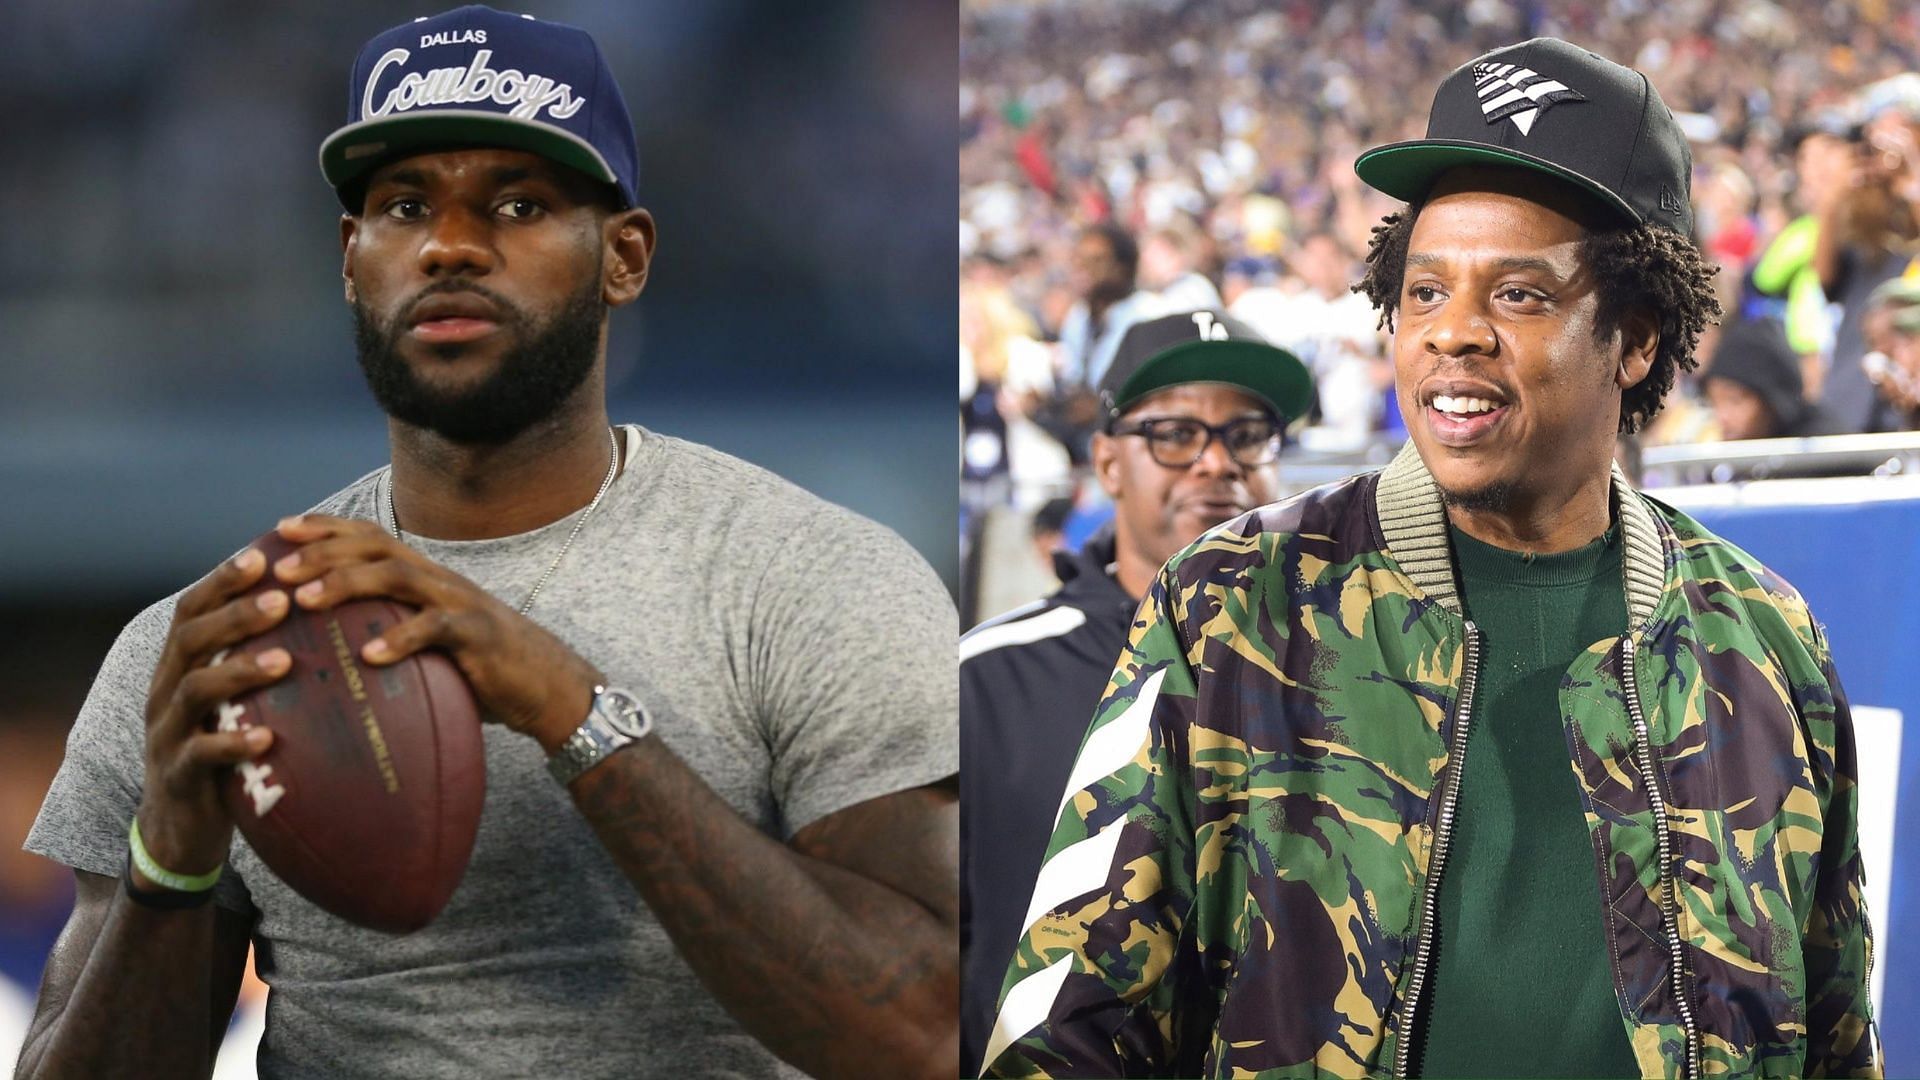 LeBron James and JayZ were both spotted in attendance as the Dallas Cowboys beat the LA Chargers